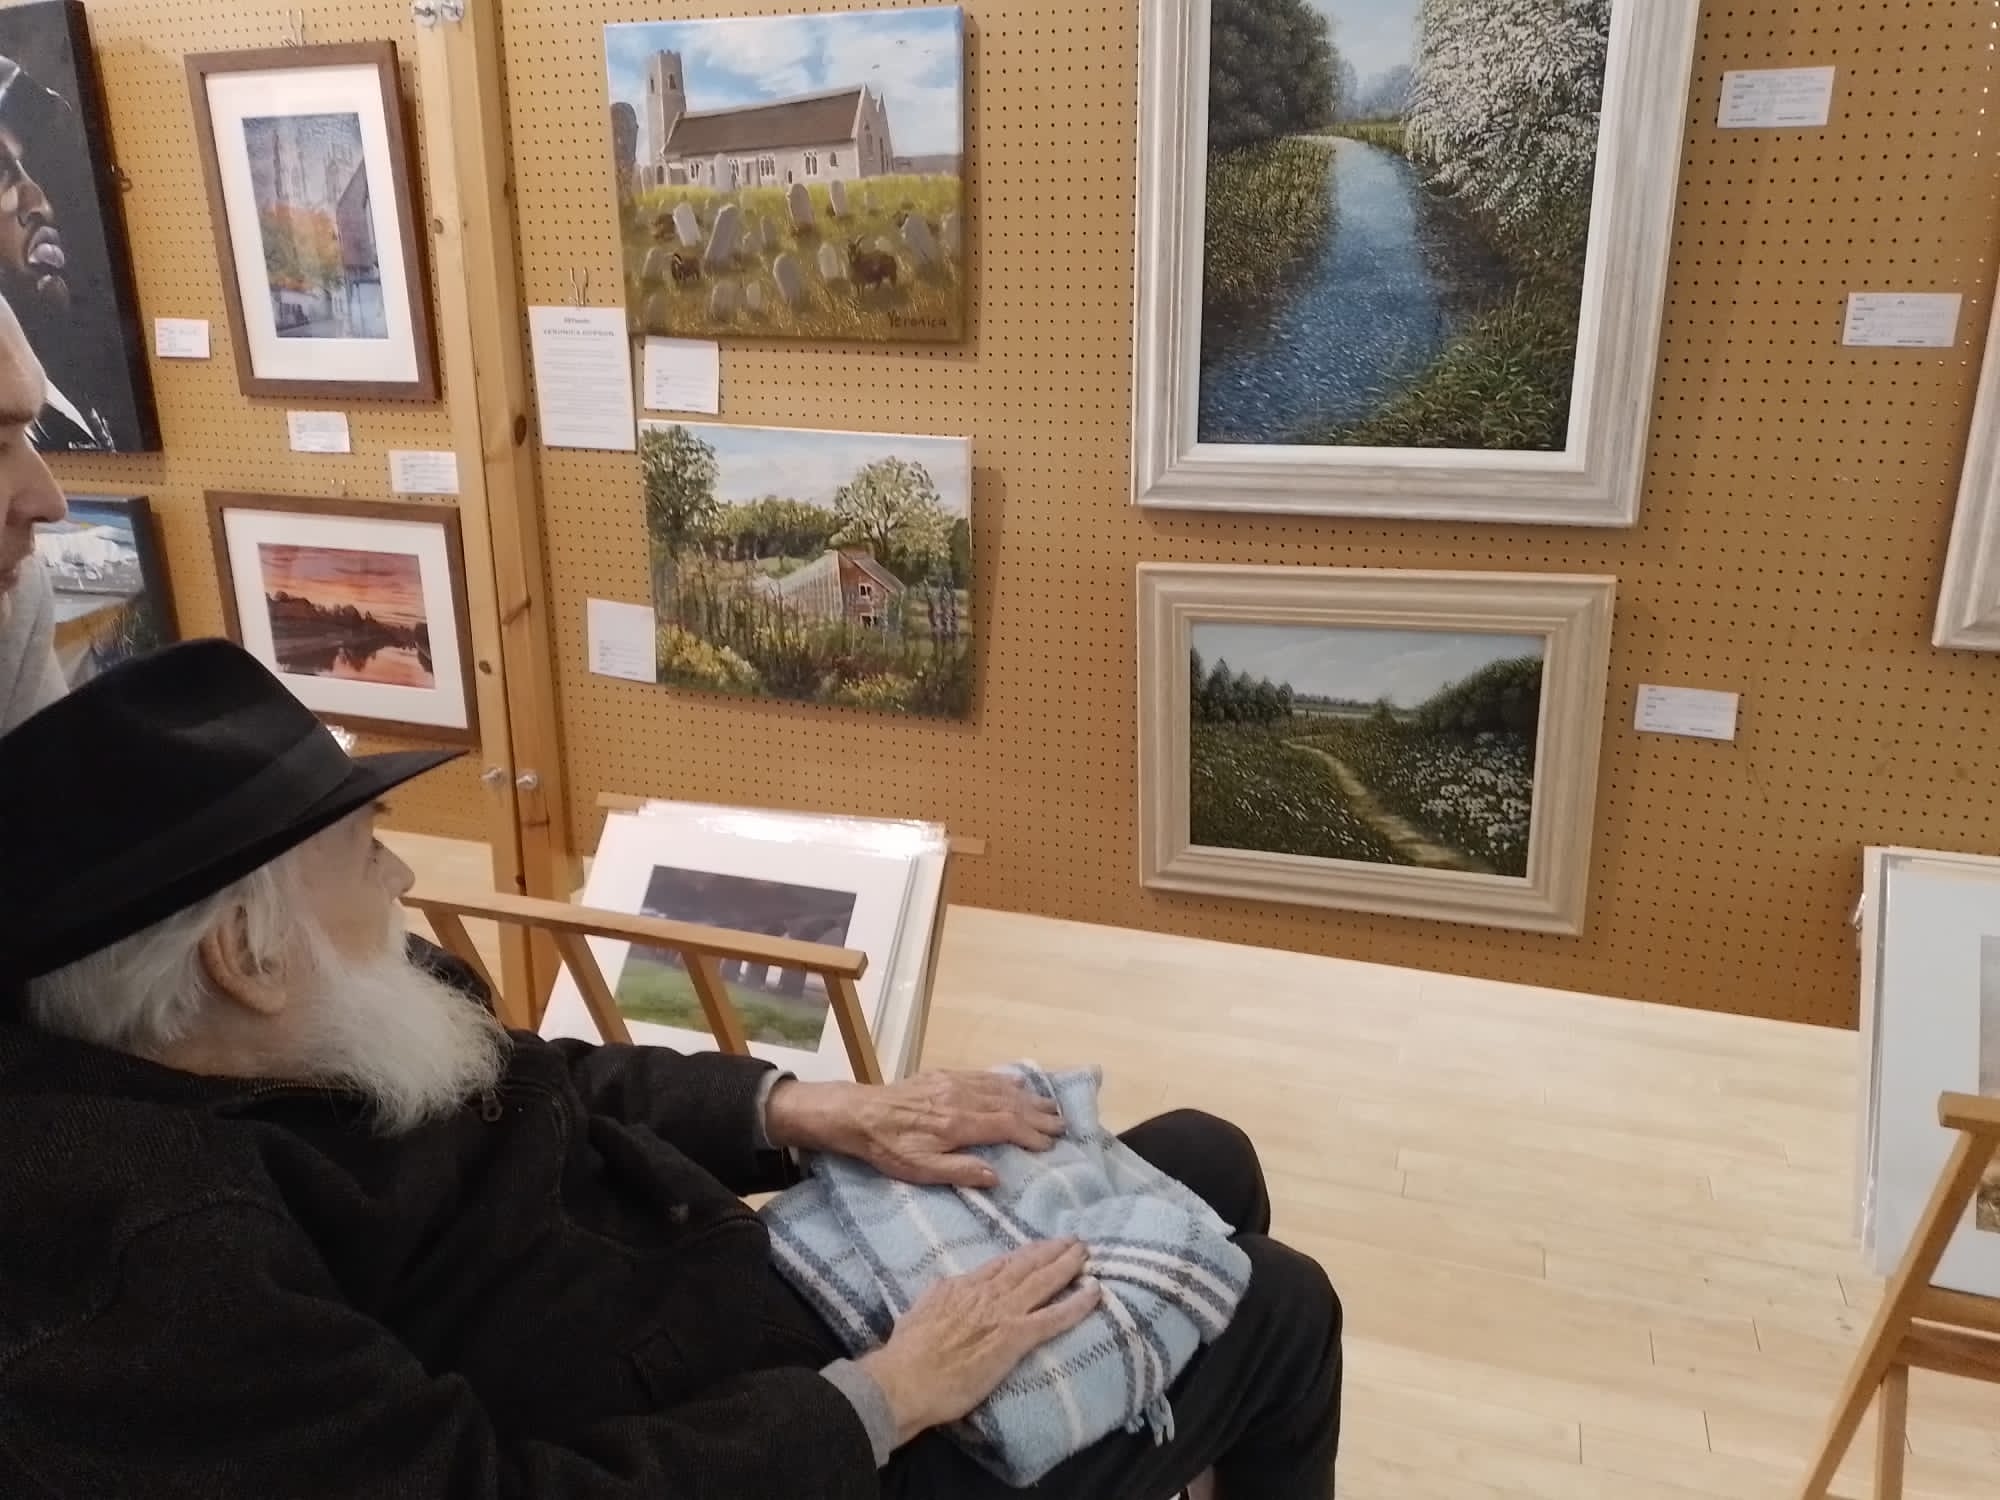 A resident looking at the art exhibition